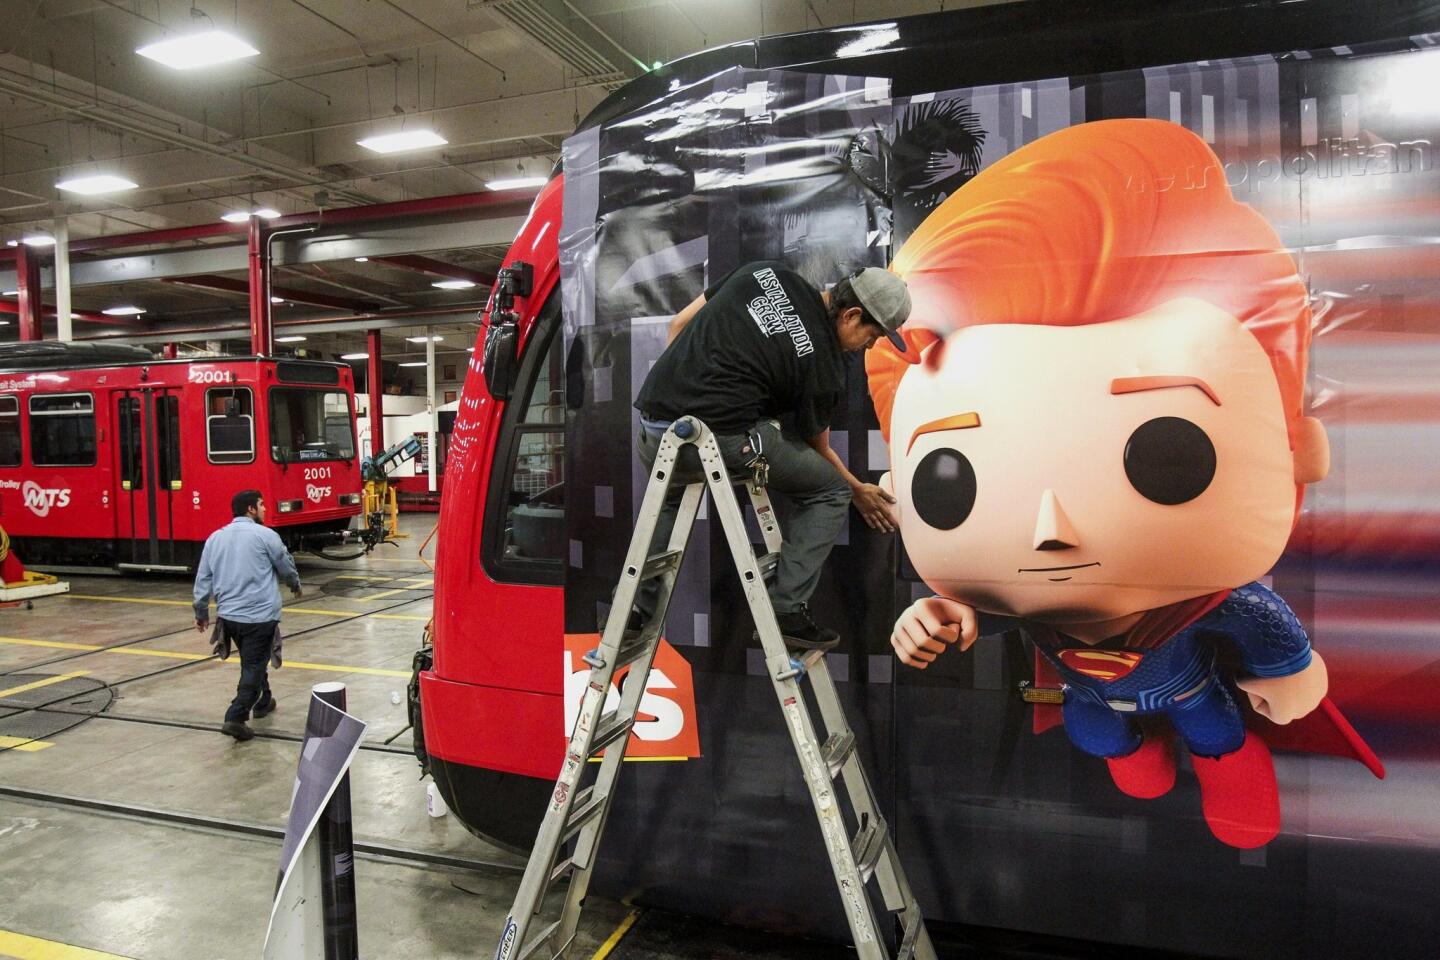 Anthony Soltero works on a section of transit vinyl as he and a crew put on an advertising wrap for TBS television host Conan O'Brien's talk show on a trolley car.